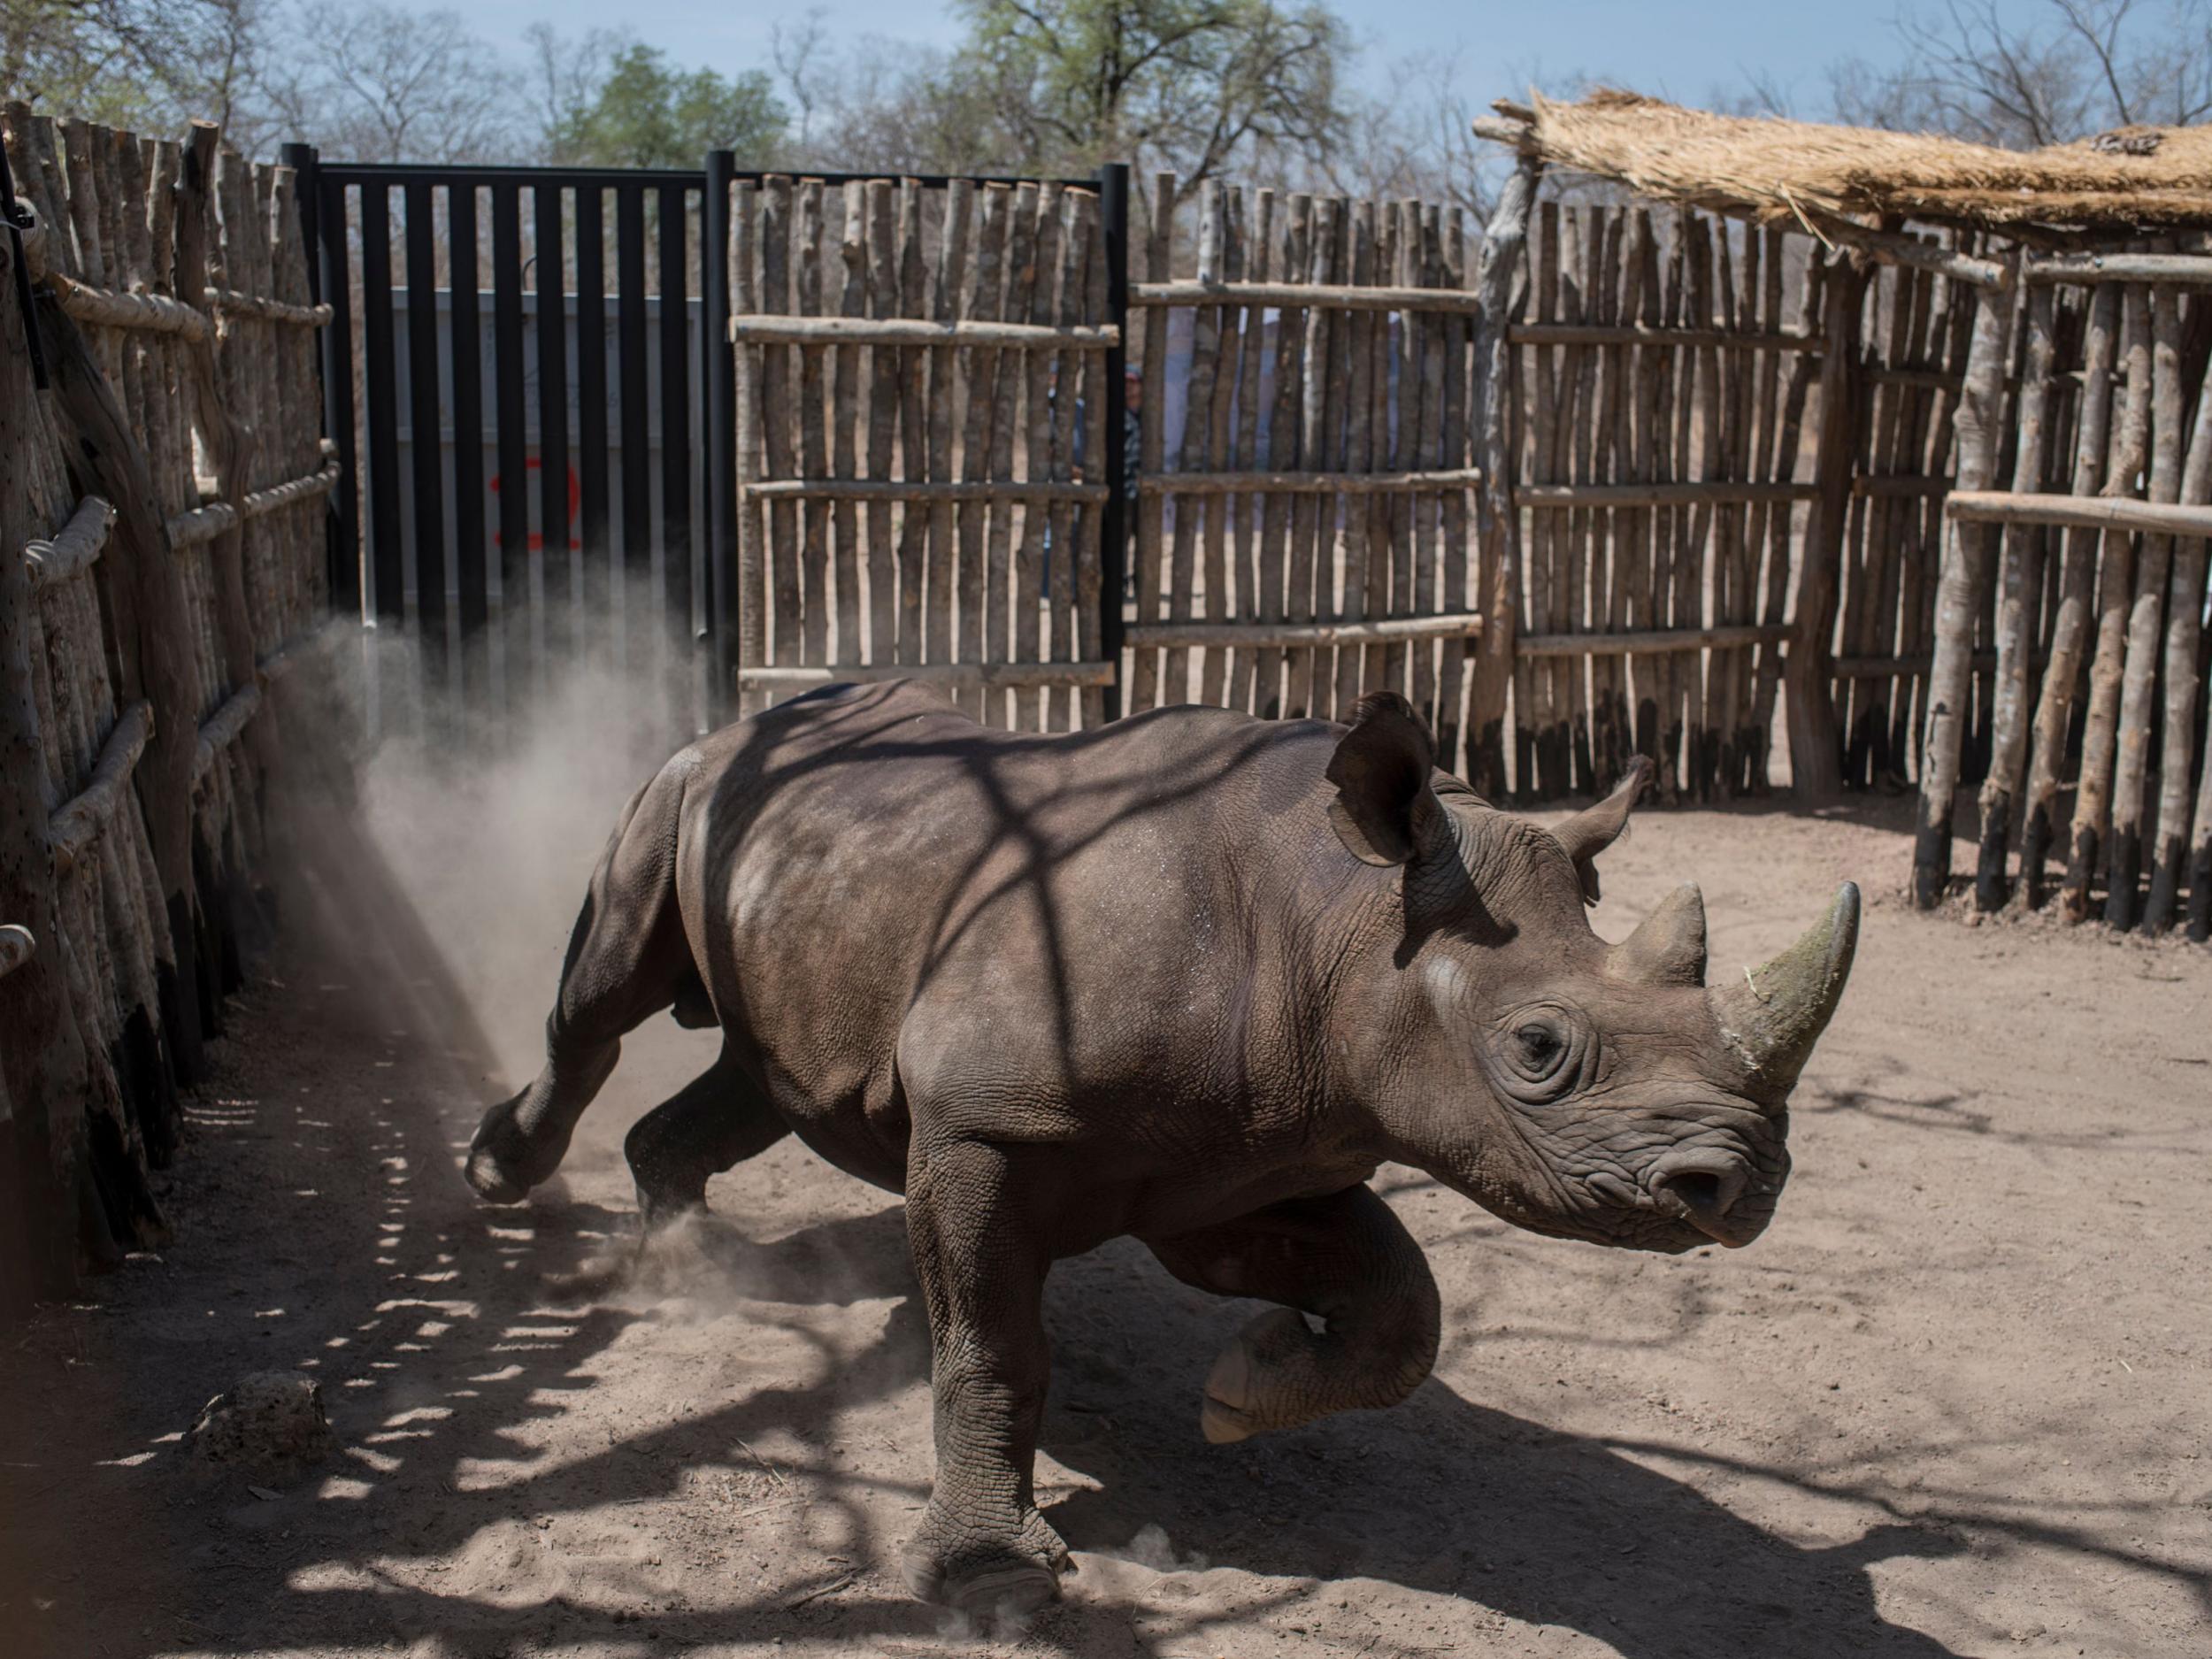 A newly arrived black rhino runs around in a holding pen in Chad's Zakouma National Park